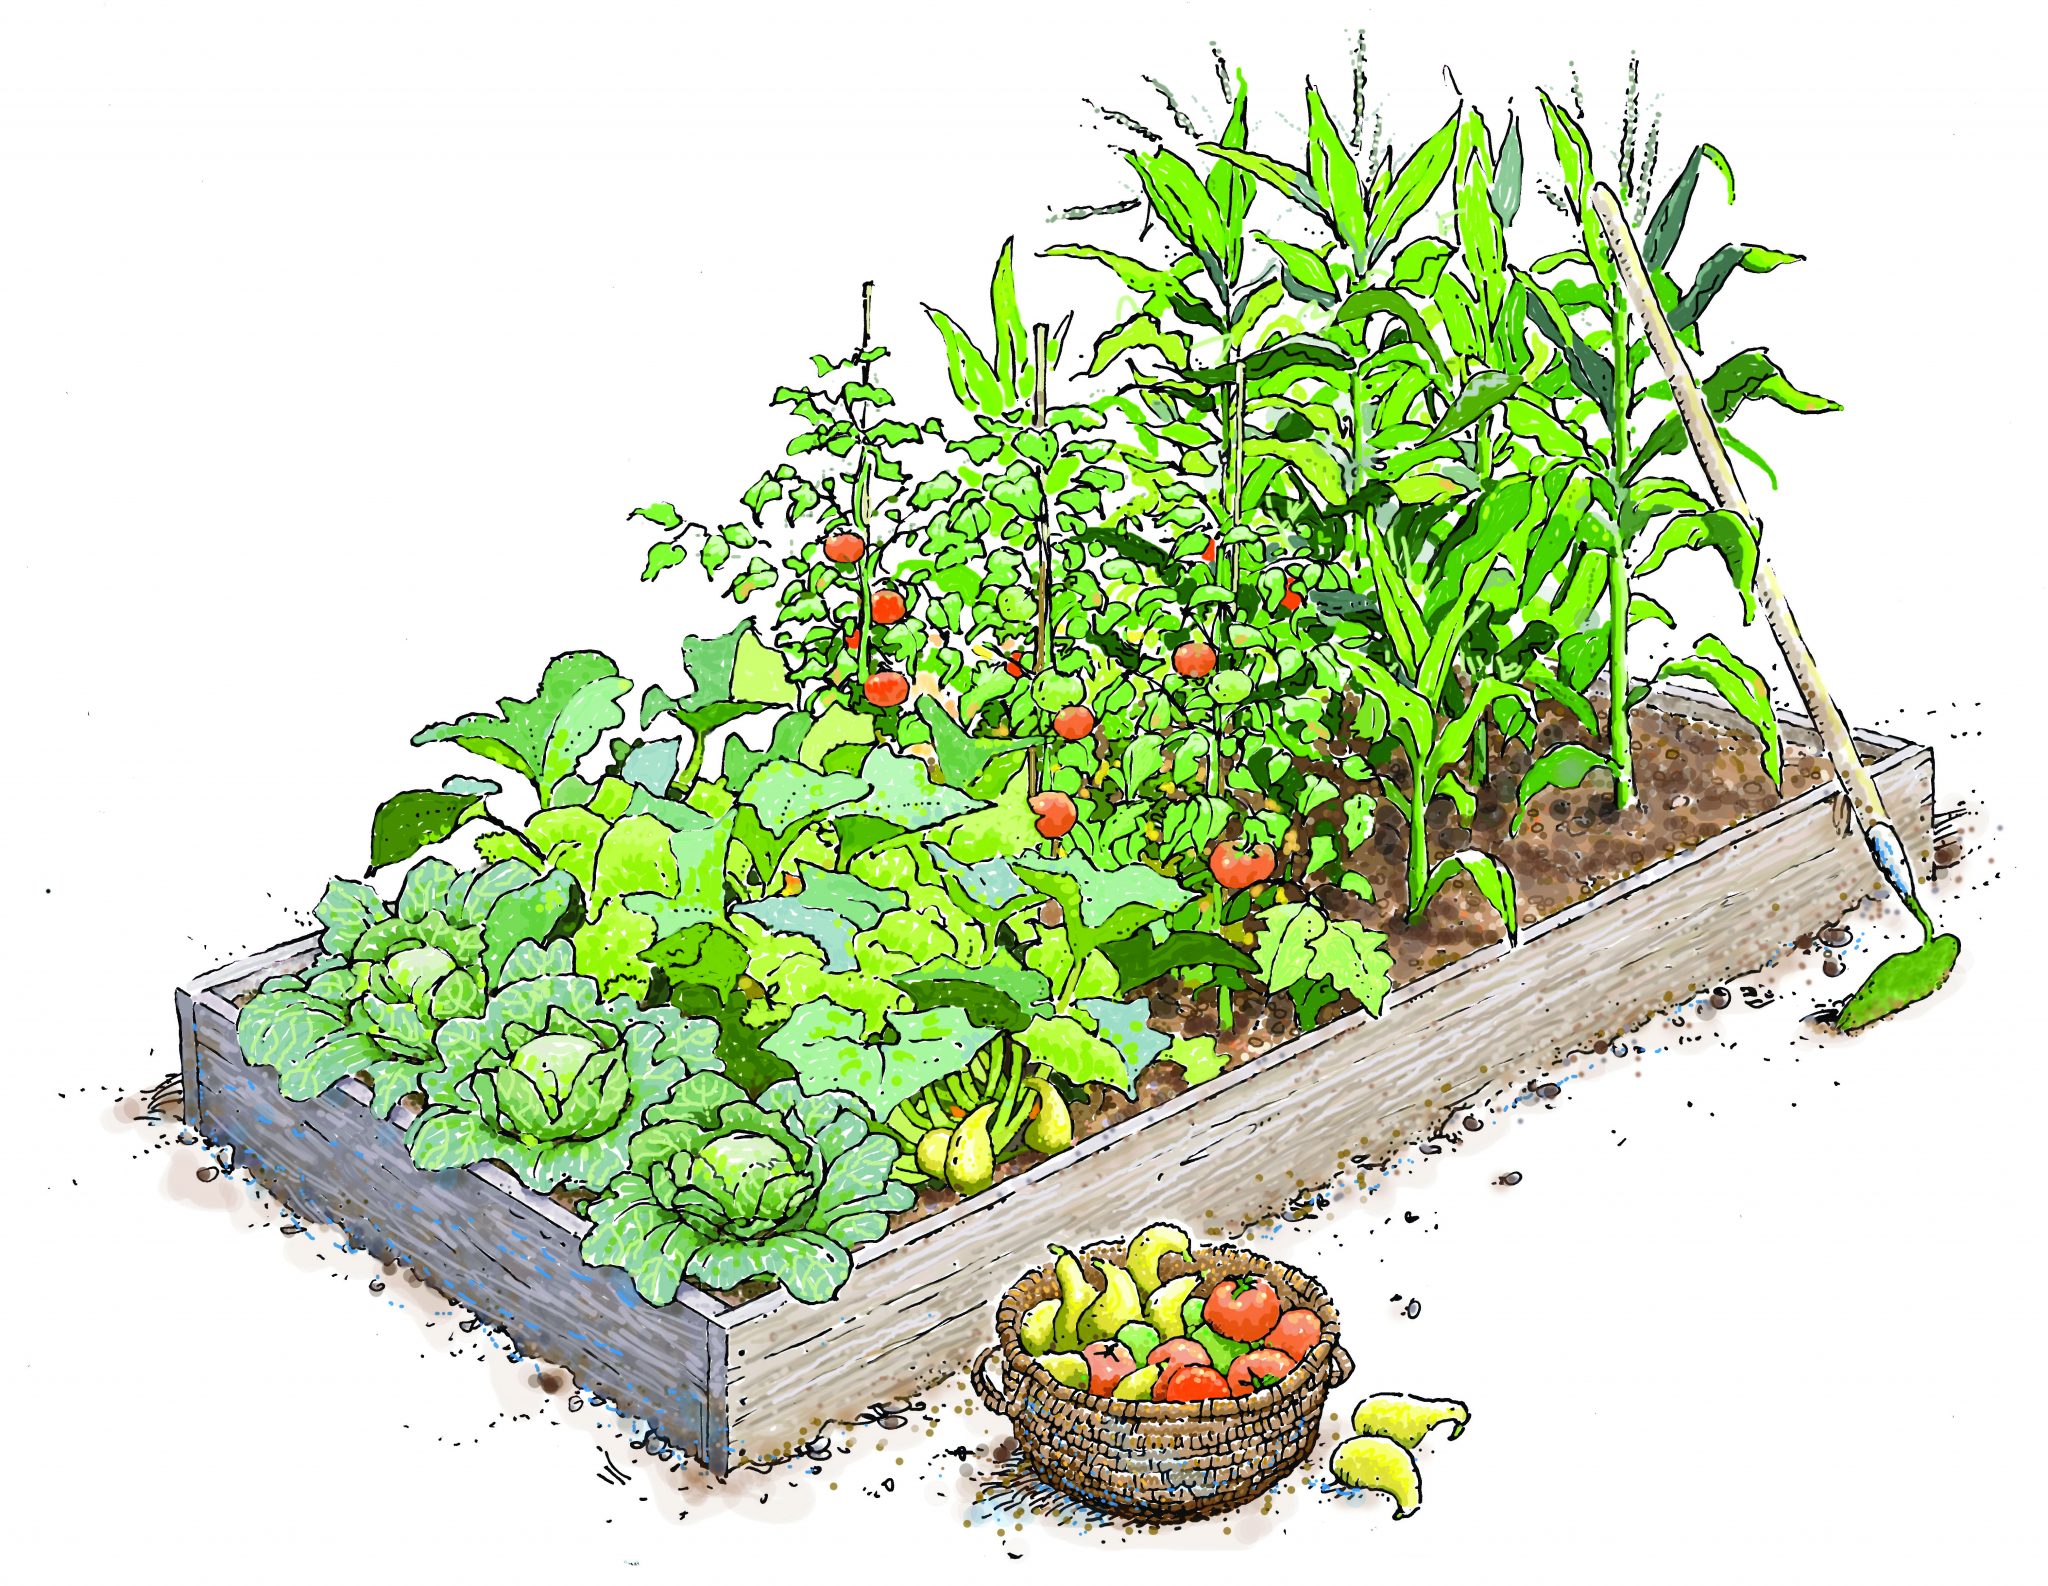 Raised Bed Gardening Alabama, How Do You Prepare A Soil For Raised Bed Vegetable Garden